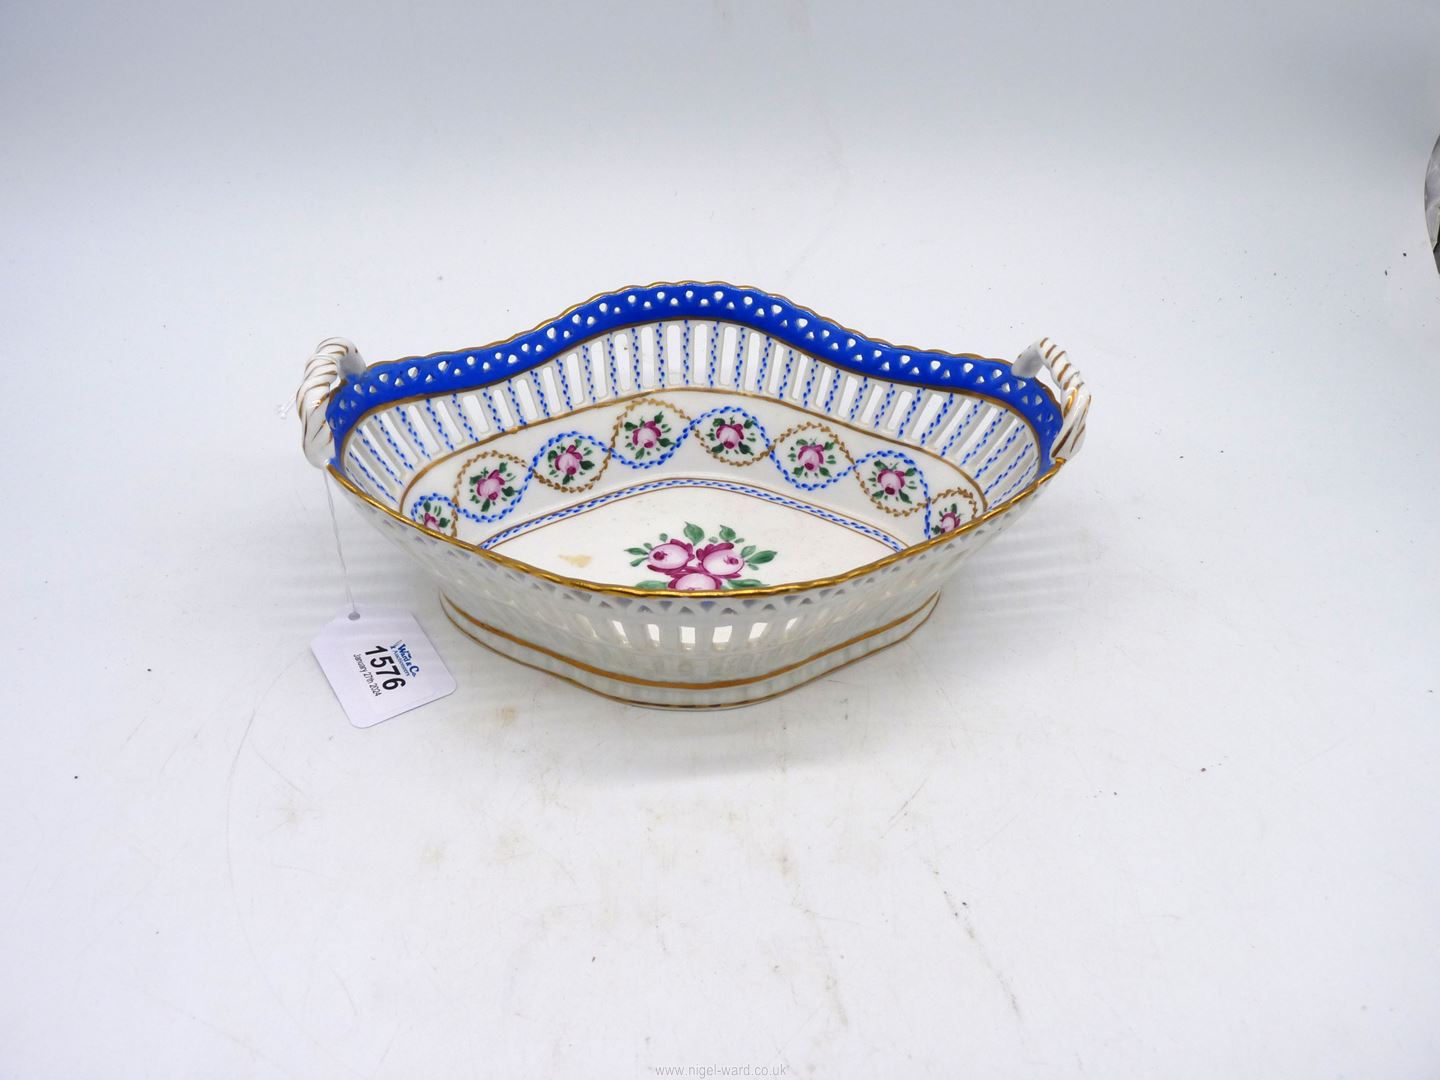 A quatrefoil shaped dish with open work sides, twisted handles and floral decoration.